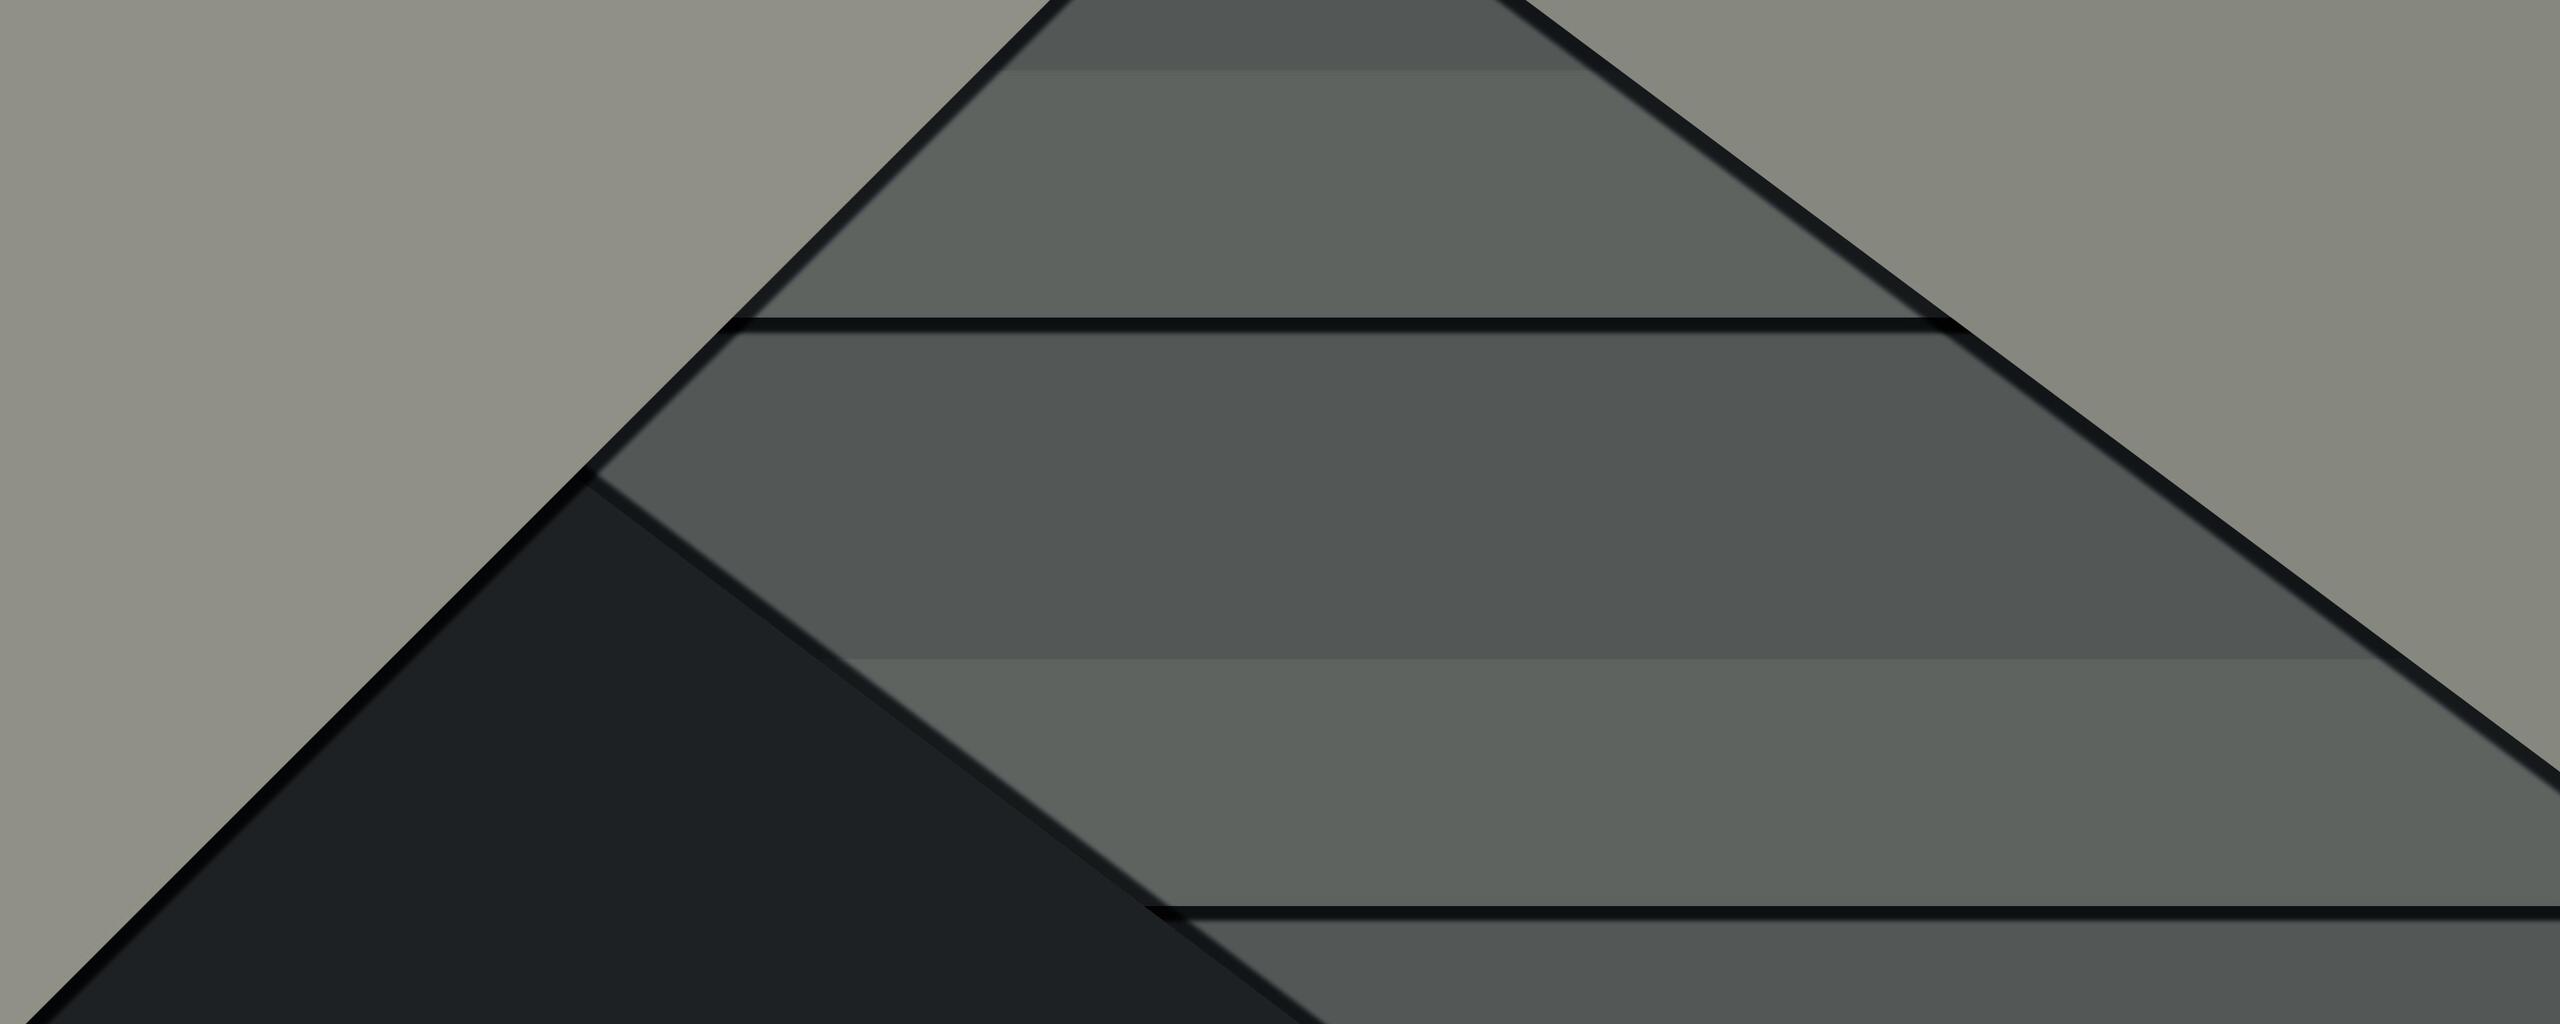 material-triangle-rt.jpg